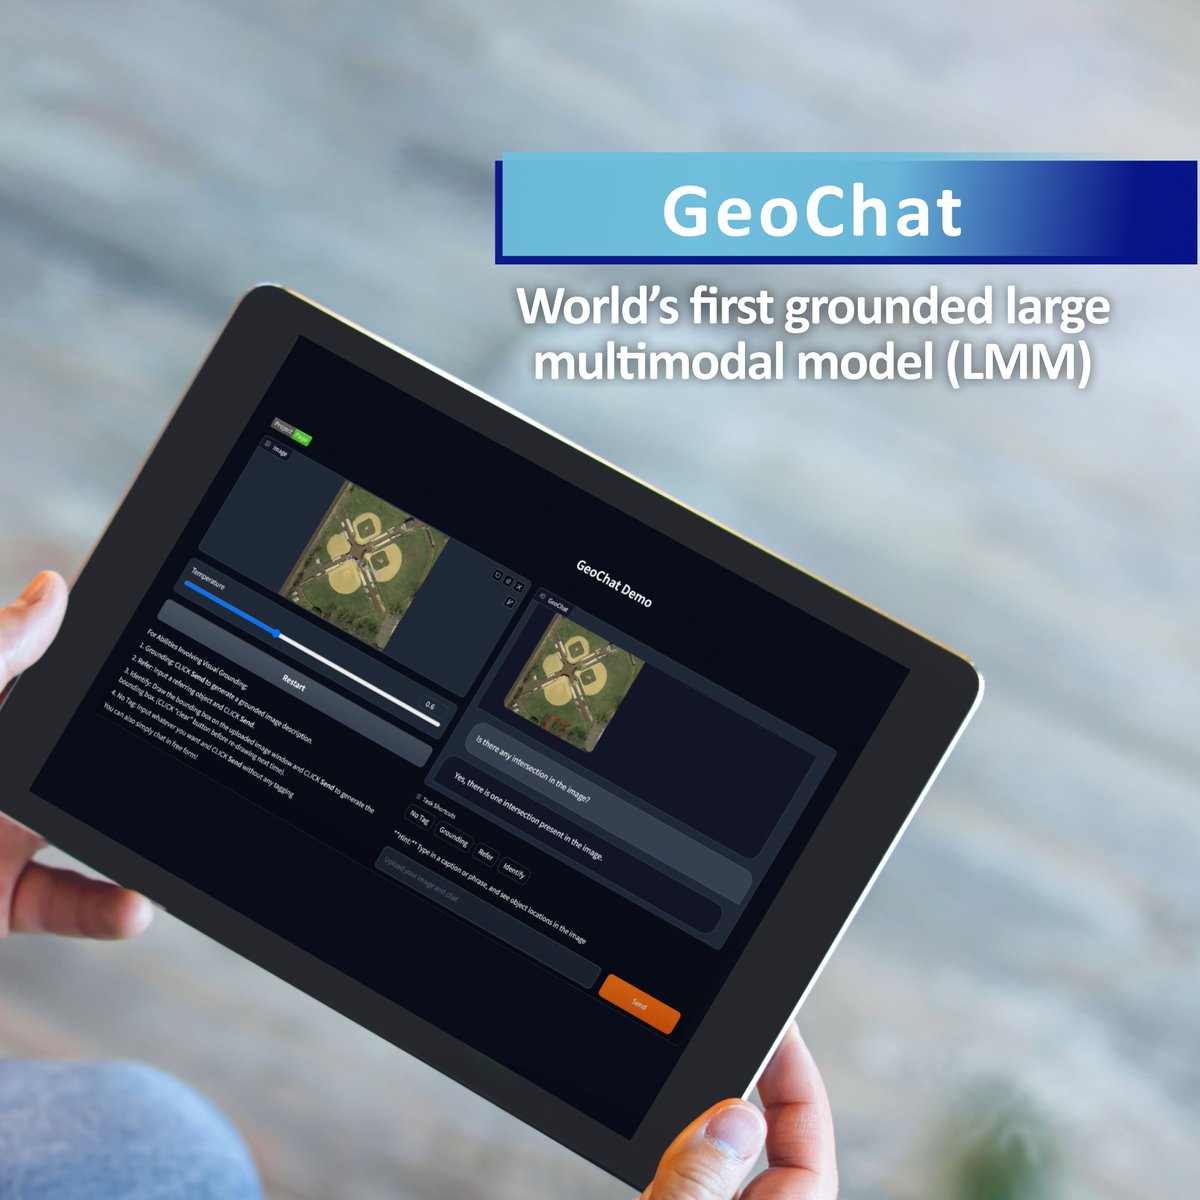 MBZUAI introduces the world's first grounded large multimodal model (#LMM), GeoChat, which is tailor-made for remote sensing (RS) scenarios. GeoChat transforms remote sensing by analyzing detailed images with advanced regional reasoning and sets new standards in RS #AI with